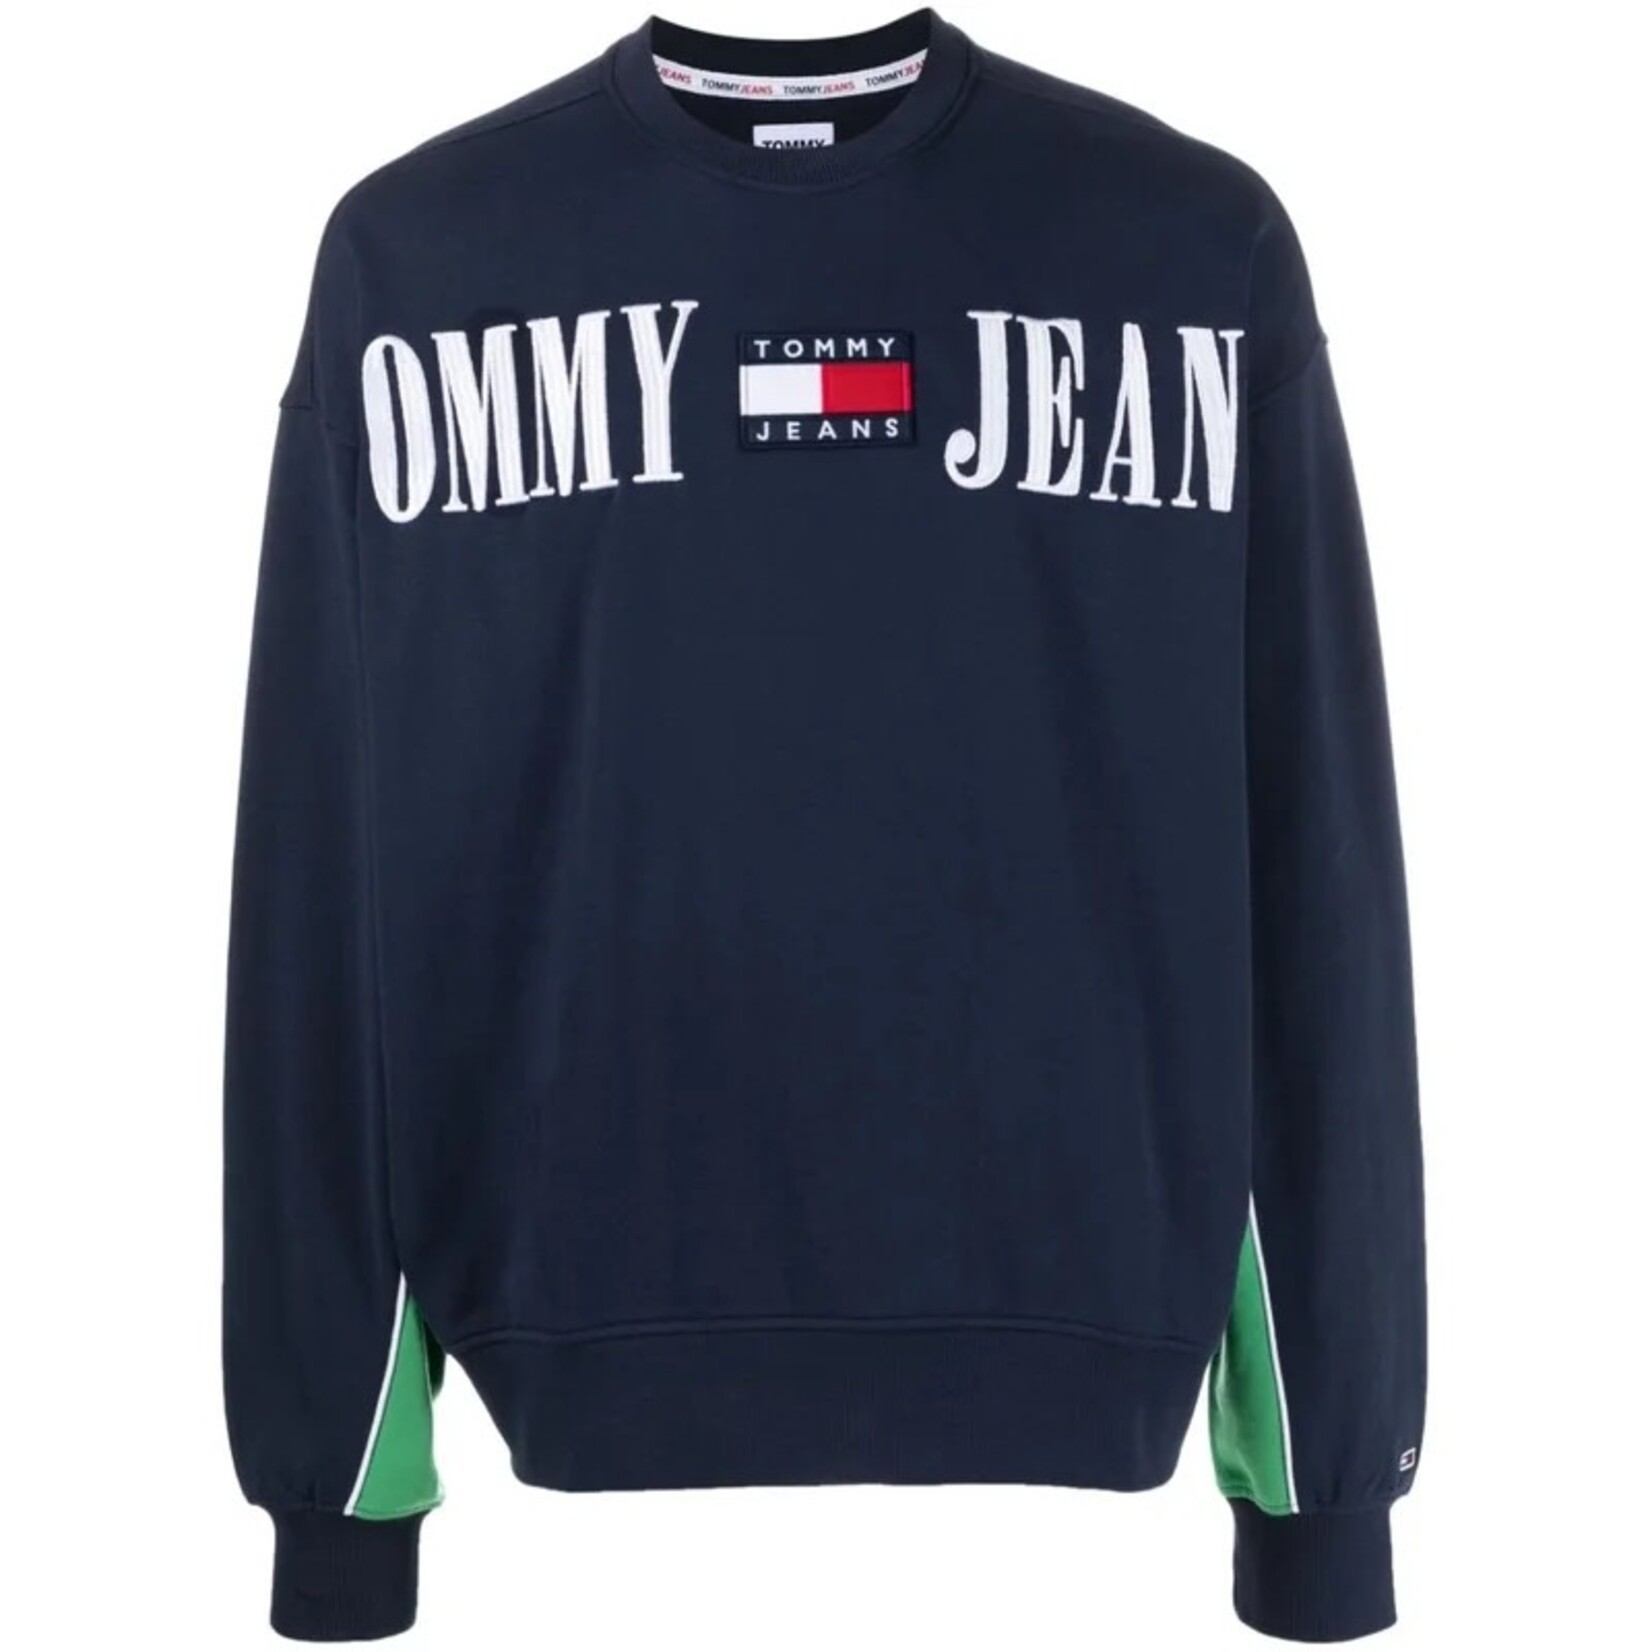 TOMMY JEANS TJ BOXY ARCHIVE CREW